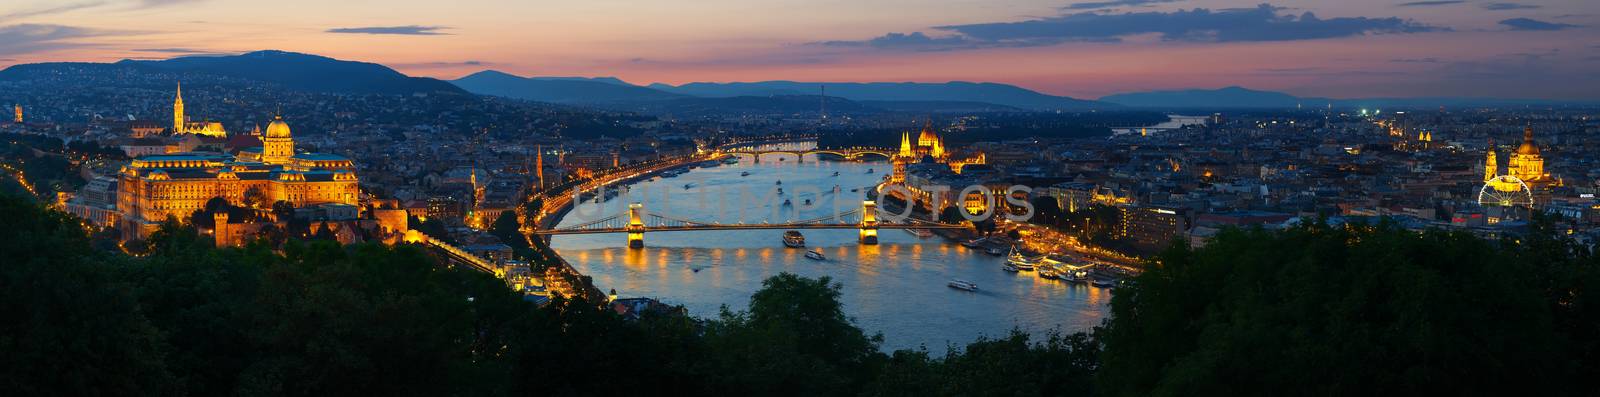 Landmarks of Budapest by Givaga